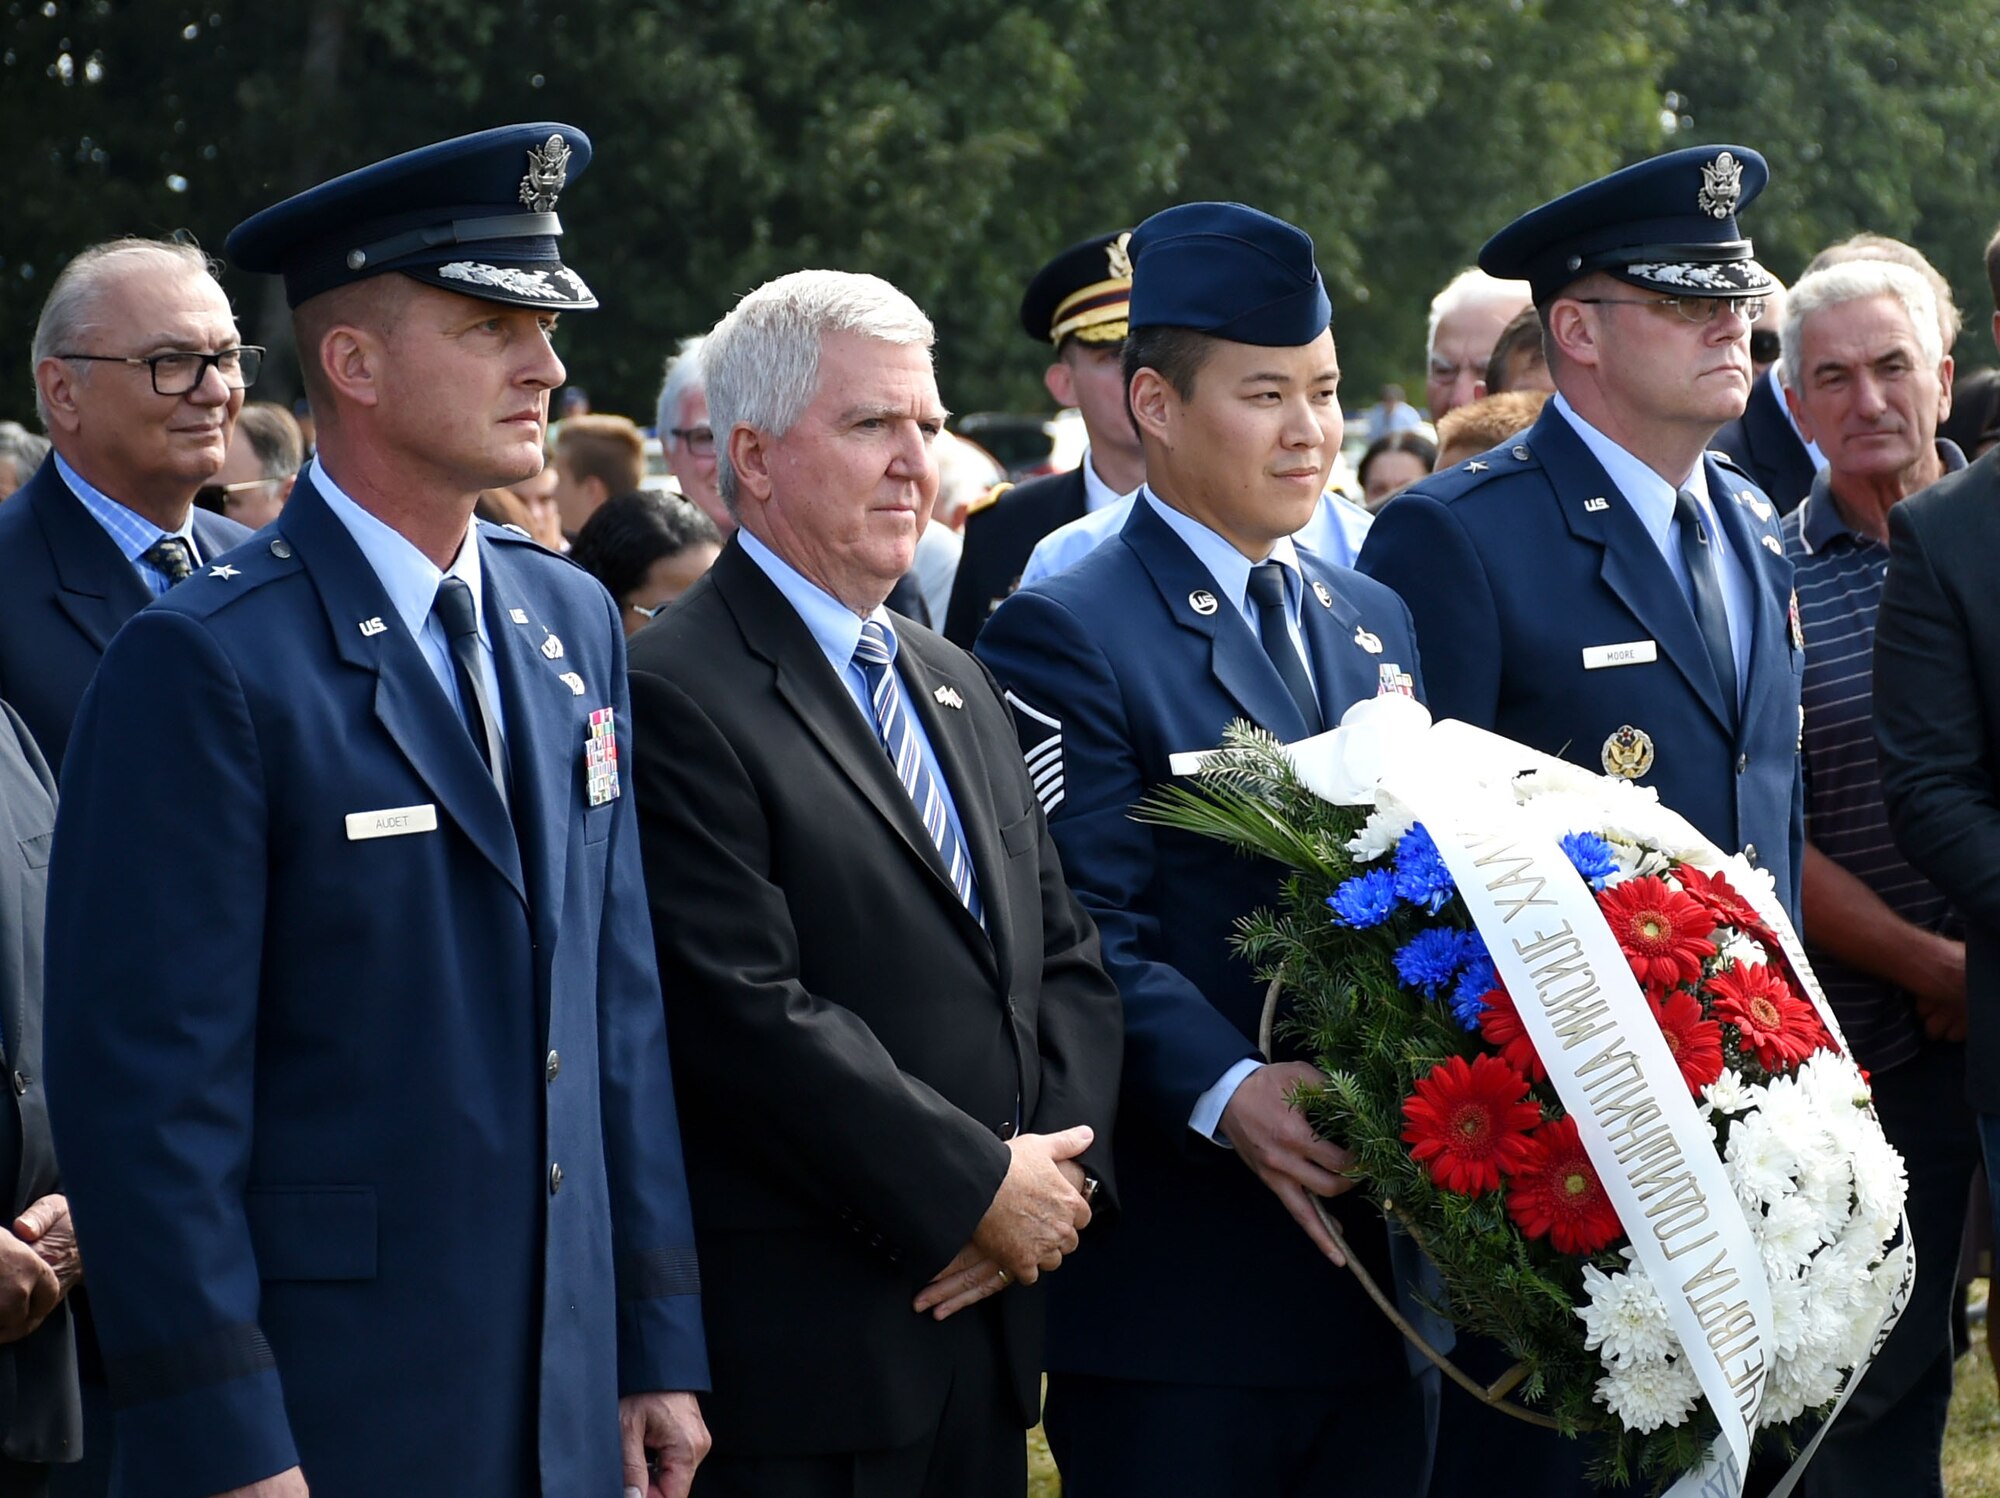 Lined up from left to right, Brig. Gen. Todd M. Audet, Ohio Air National Guard Chief of Staff, Kyle Scott, U.S. Ambassador to Serbia, MSgt Ng, and Brig. Gen. Richard G. Moore Jr., U.S. Air Forces in Europe Chief of Staff, present a wreath at the Halyard Mission Commemoration in Pranjani, Serbia, Sept. 22, 2018. This is the 74th anniversary of the Halyard Mission, a WWII event in which local Serbian people sheltered 500 downed allied Airmen and enabled their rescue from enemy territory. (U.S. Air Force photo by TSgt Stephen Ocenosak)